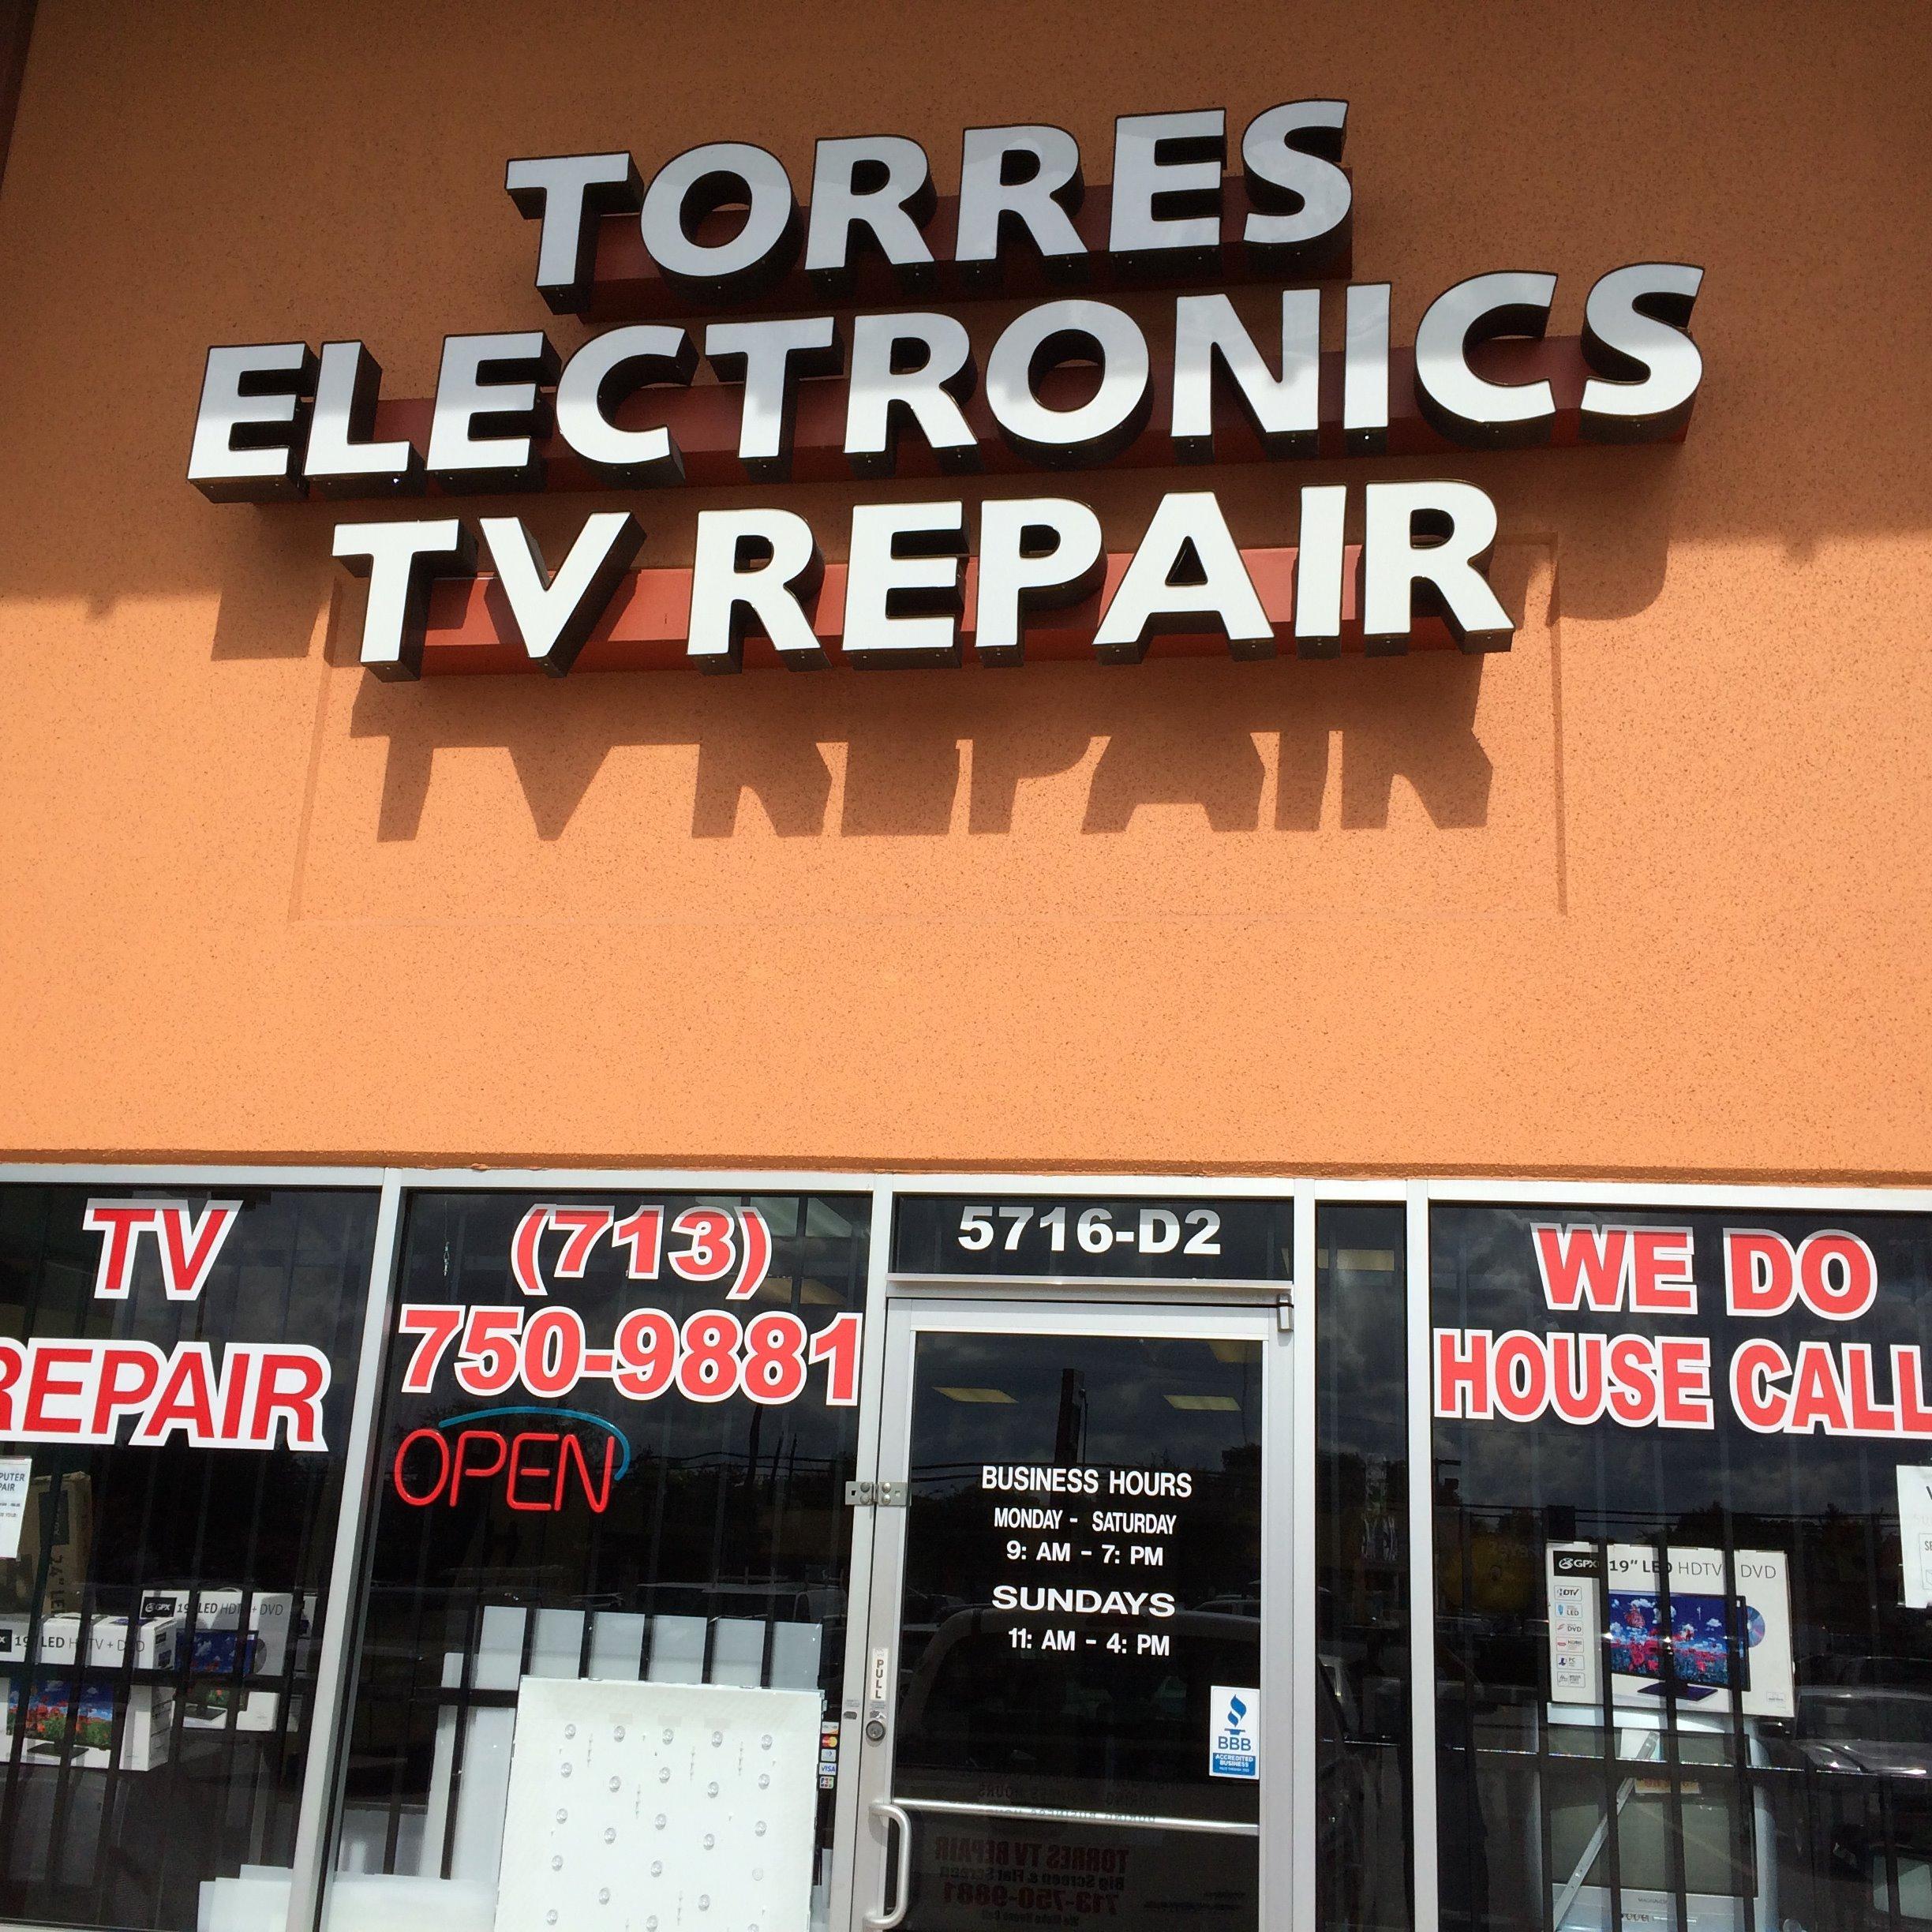 TORRES ELECTRONICS TV REPAIR AND PARTS Coupons near me in Houston, TX 77081 | 8coupons